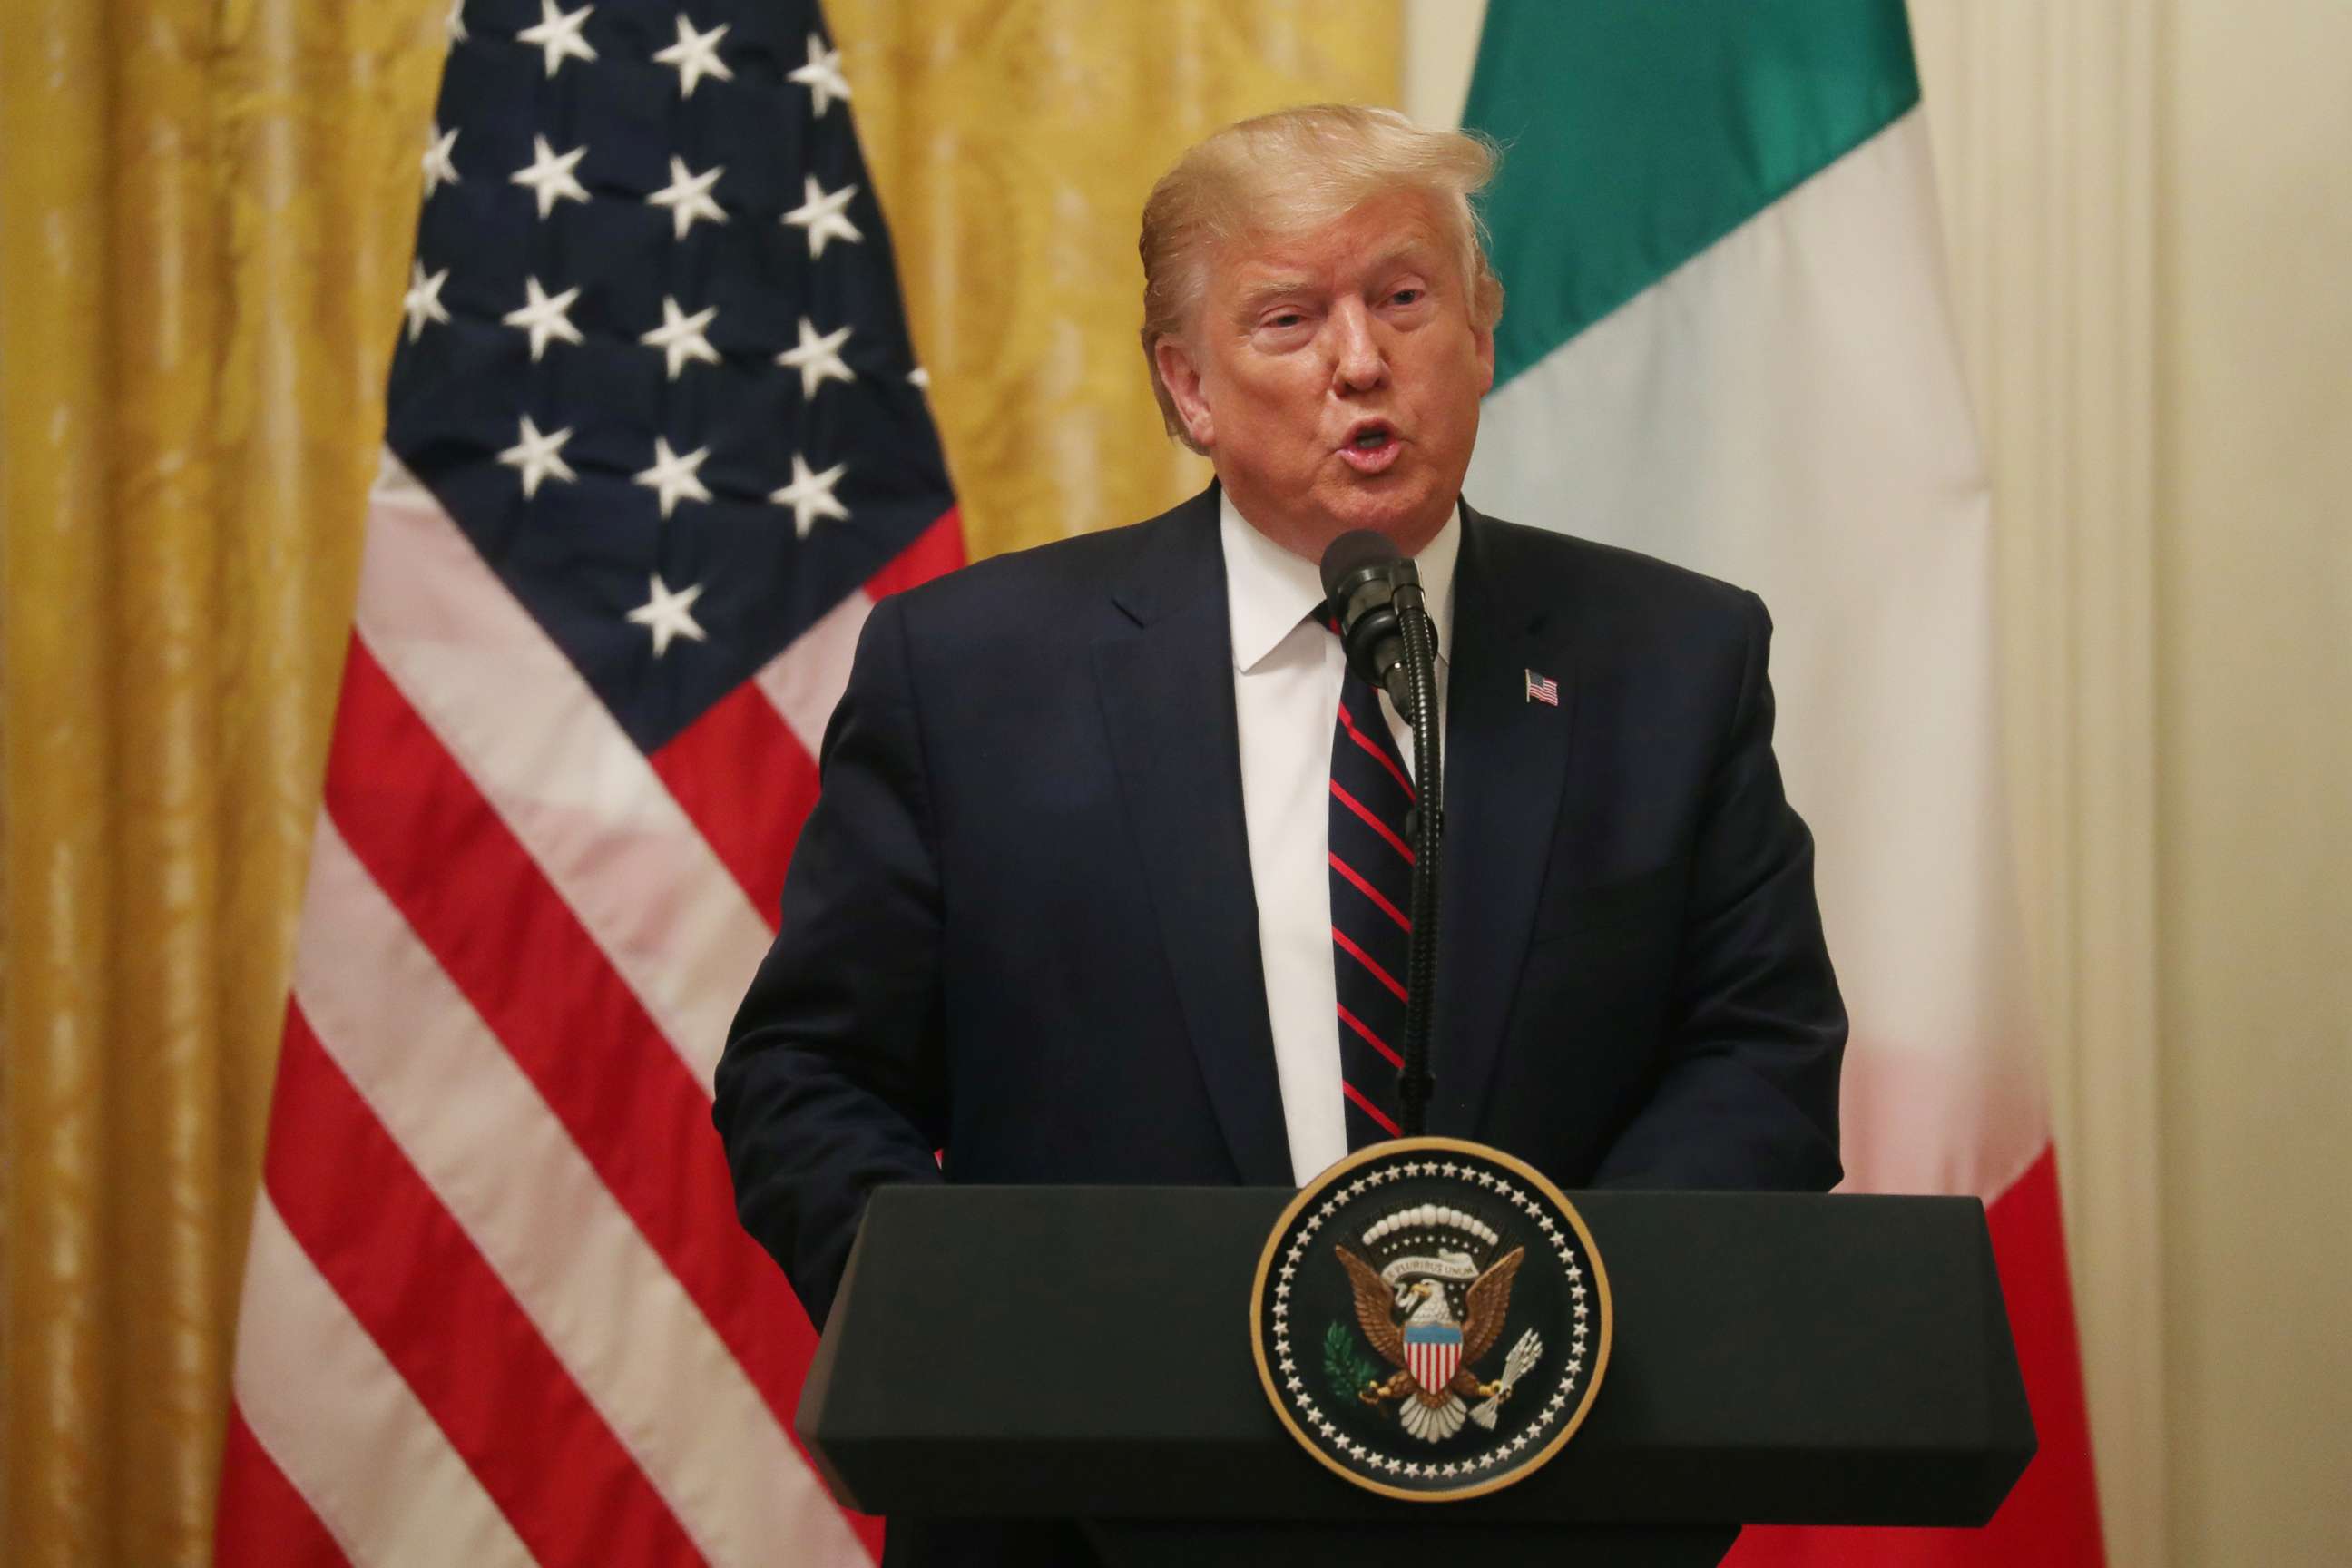 PHOTO: President Donald Trump speaks during a joint news conference with Italy's President Sergio Mattarella in the East Room of the White House in Washington, Oct. 16, 2019.